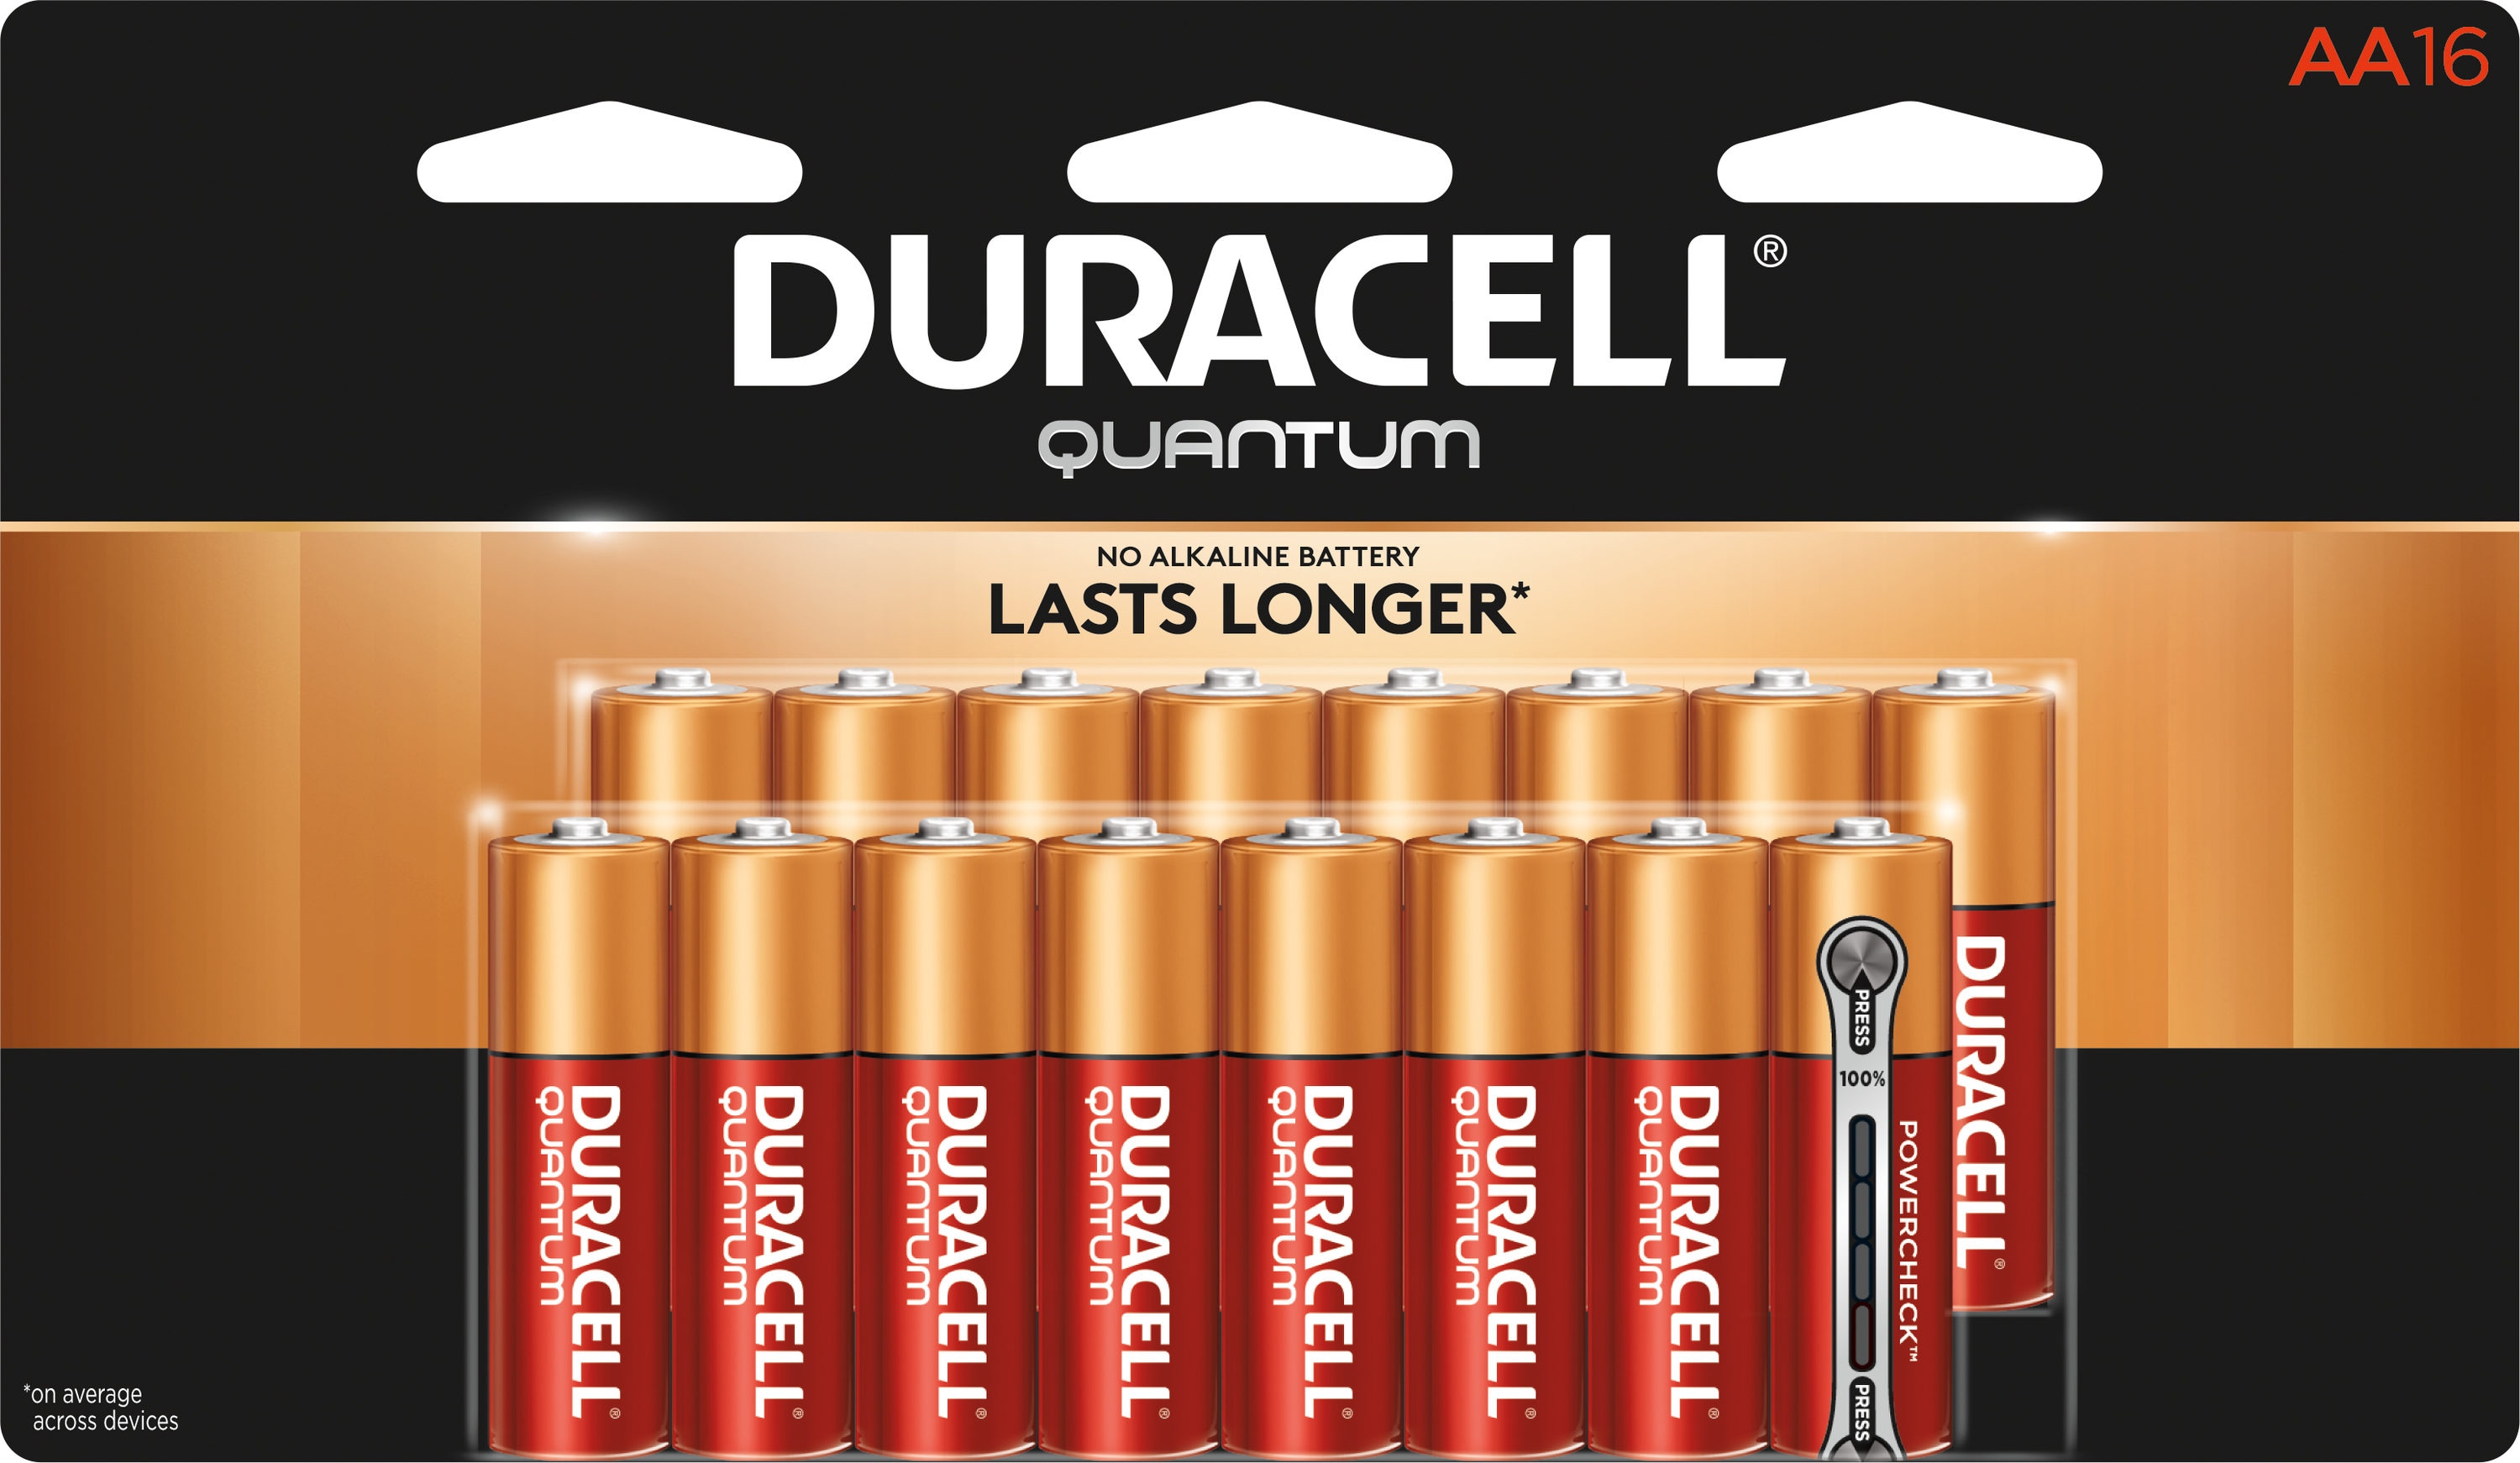 6 count All-Purpose Double A battery for Household and Business Long Lasting Duracell Quantum AA Alkaline Batteries 